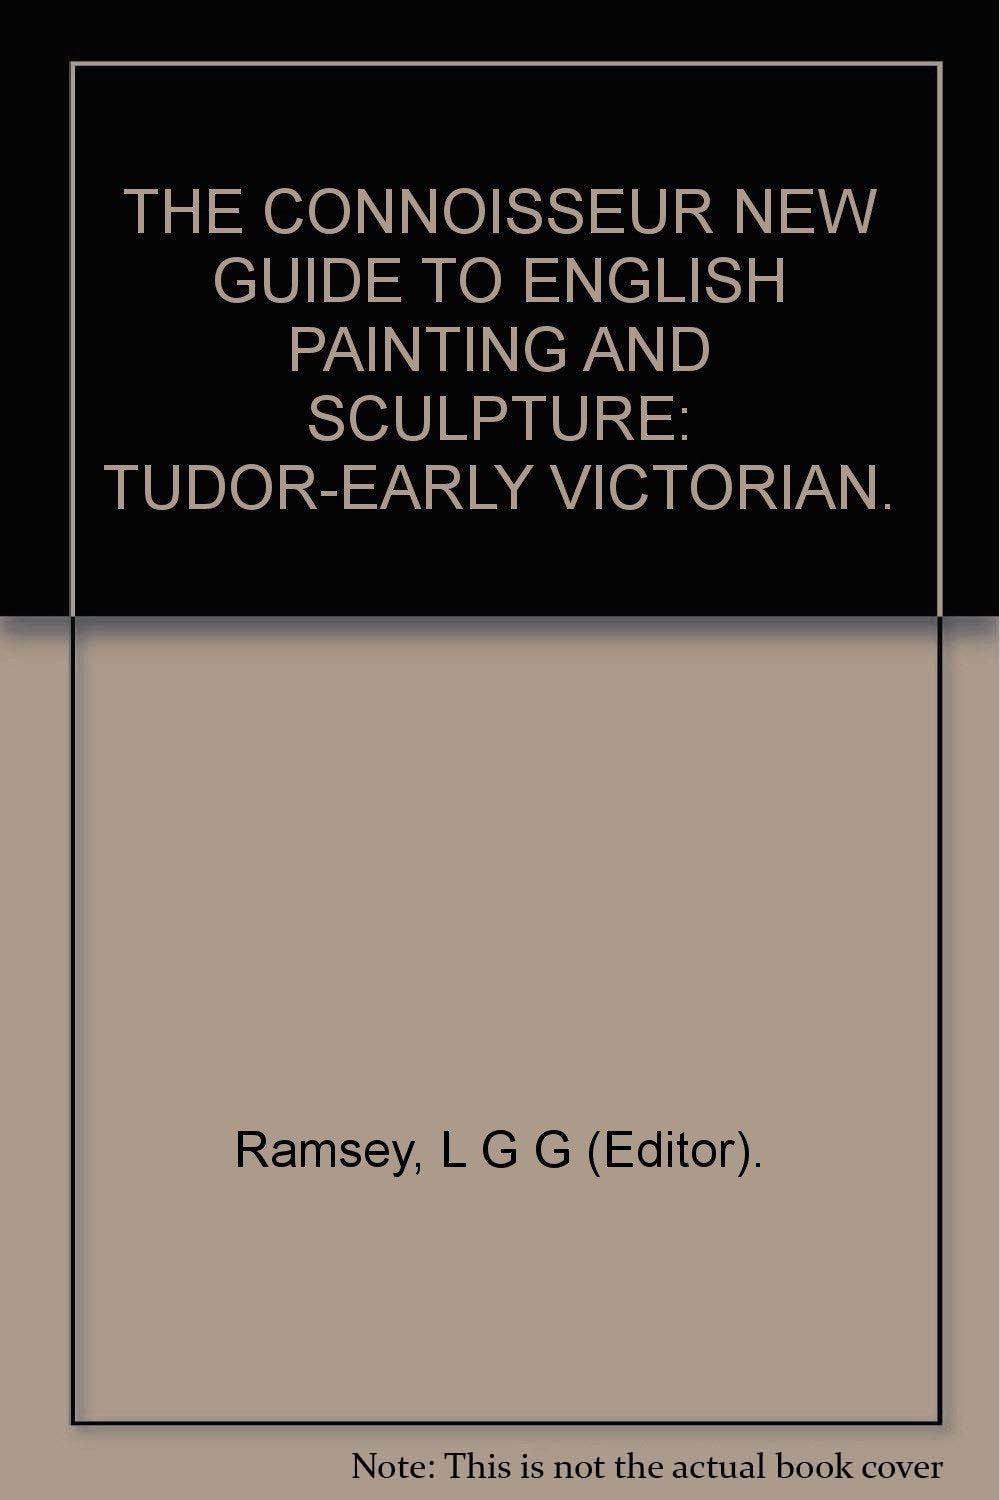 THE CONNOISSEUR NEW GUIDE TO ENGLISH PAINTING AND SCULPTURE: TUDOR-EARLY VICTORIAN. [Hardcover] Ramsey, L G G (Editor).